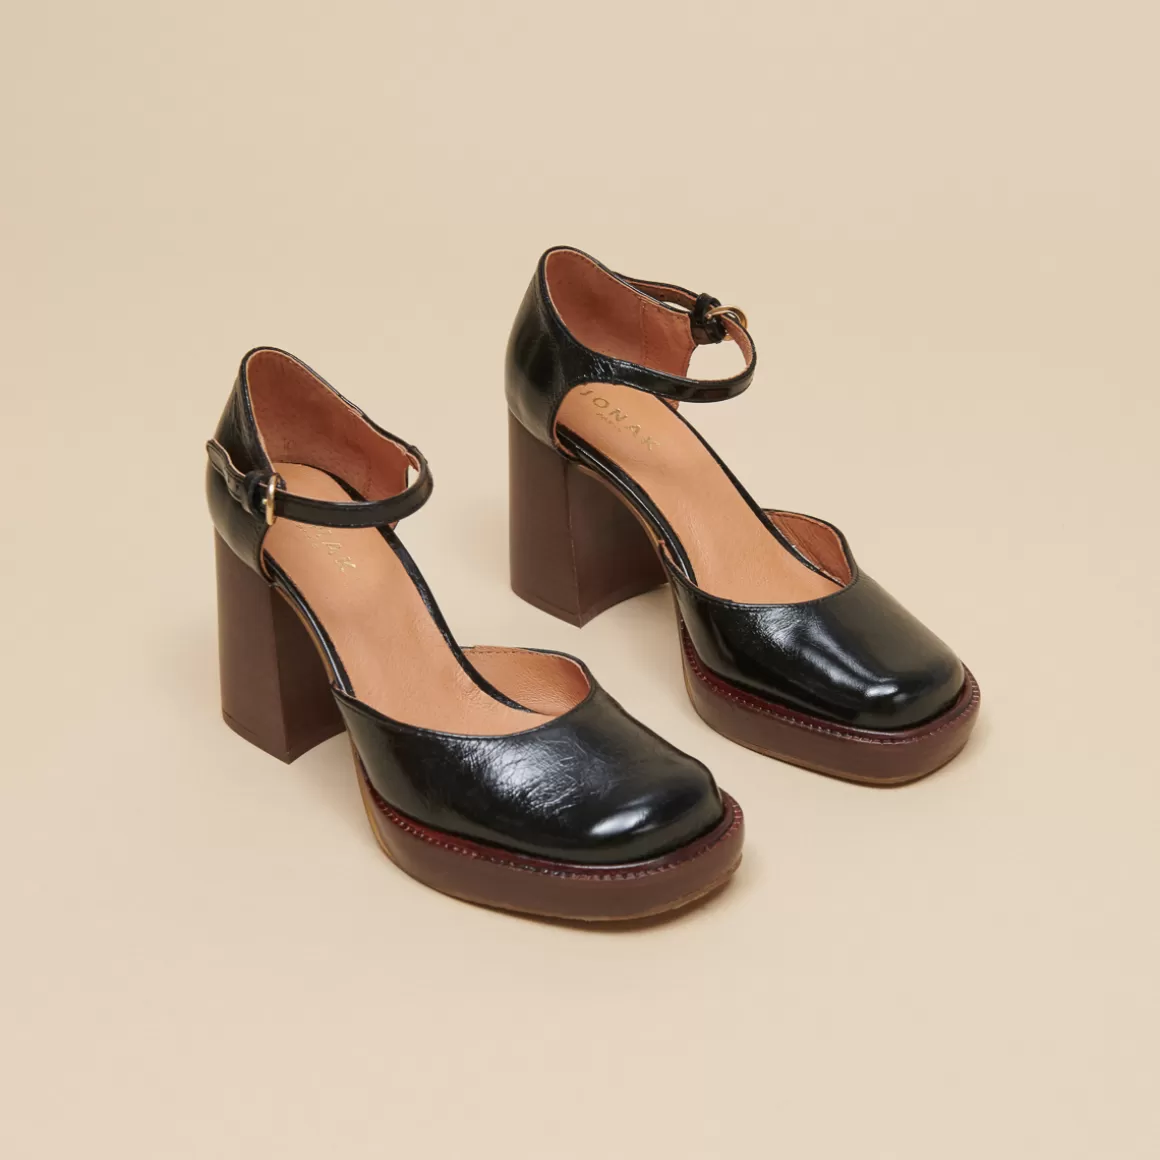 Platform Mary Janes with ankle strap<Jonak Flash Sale